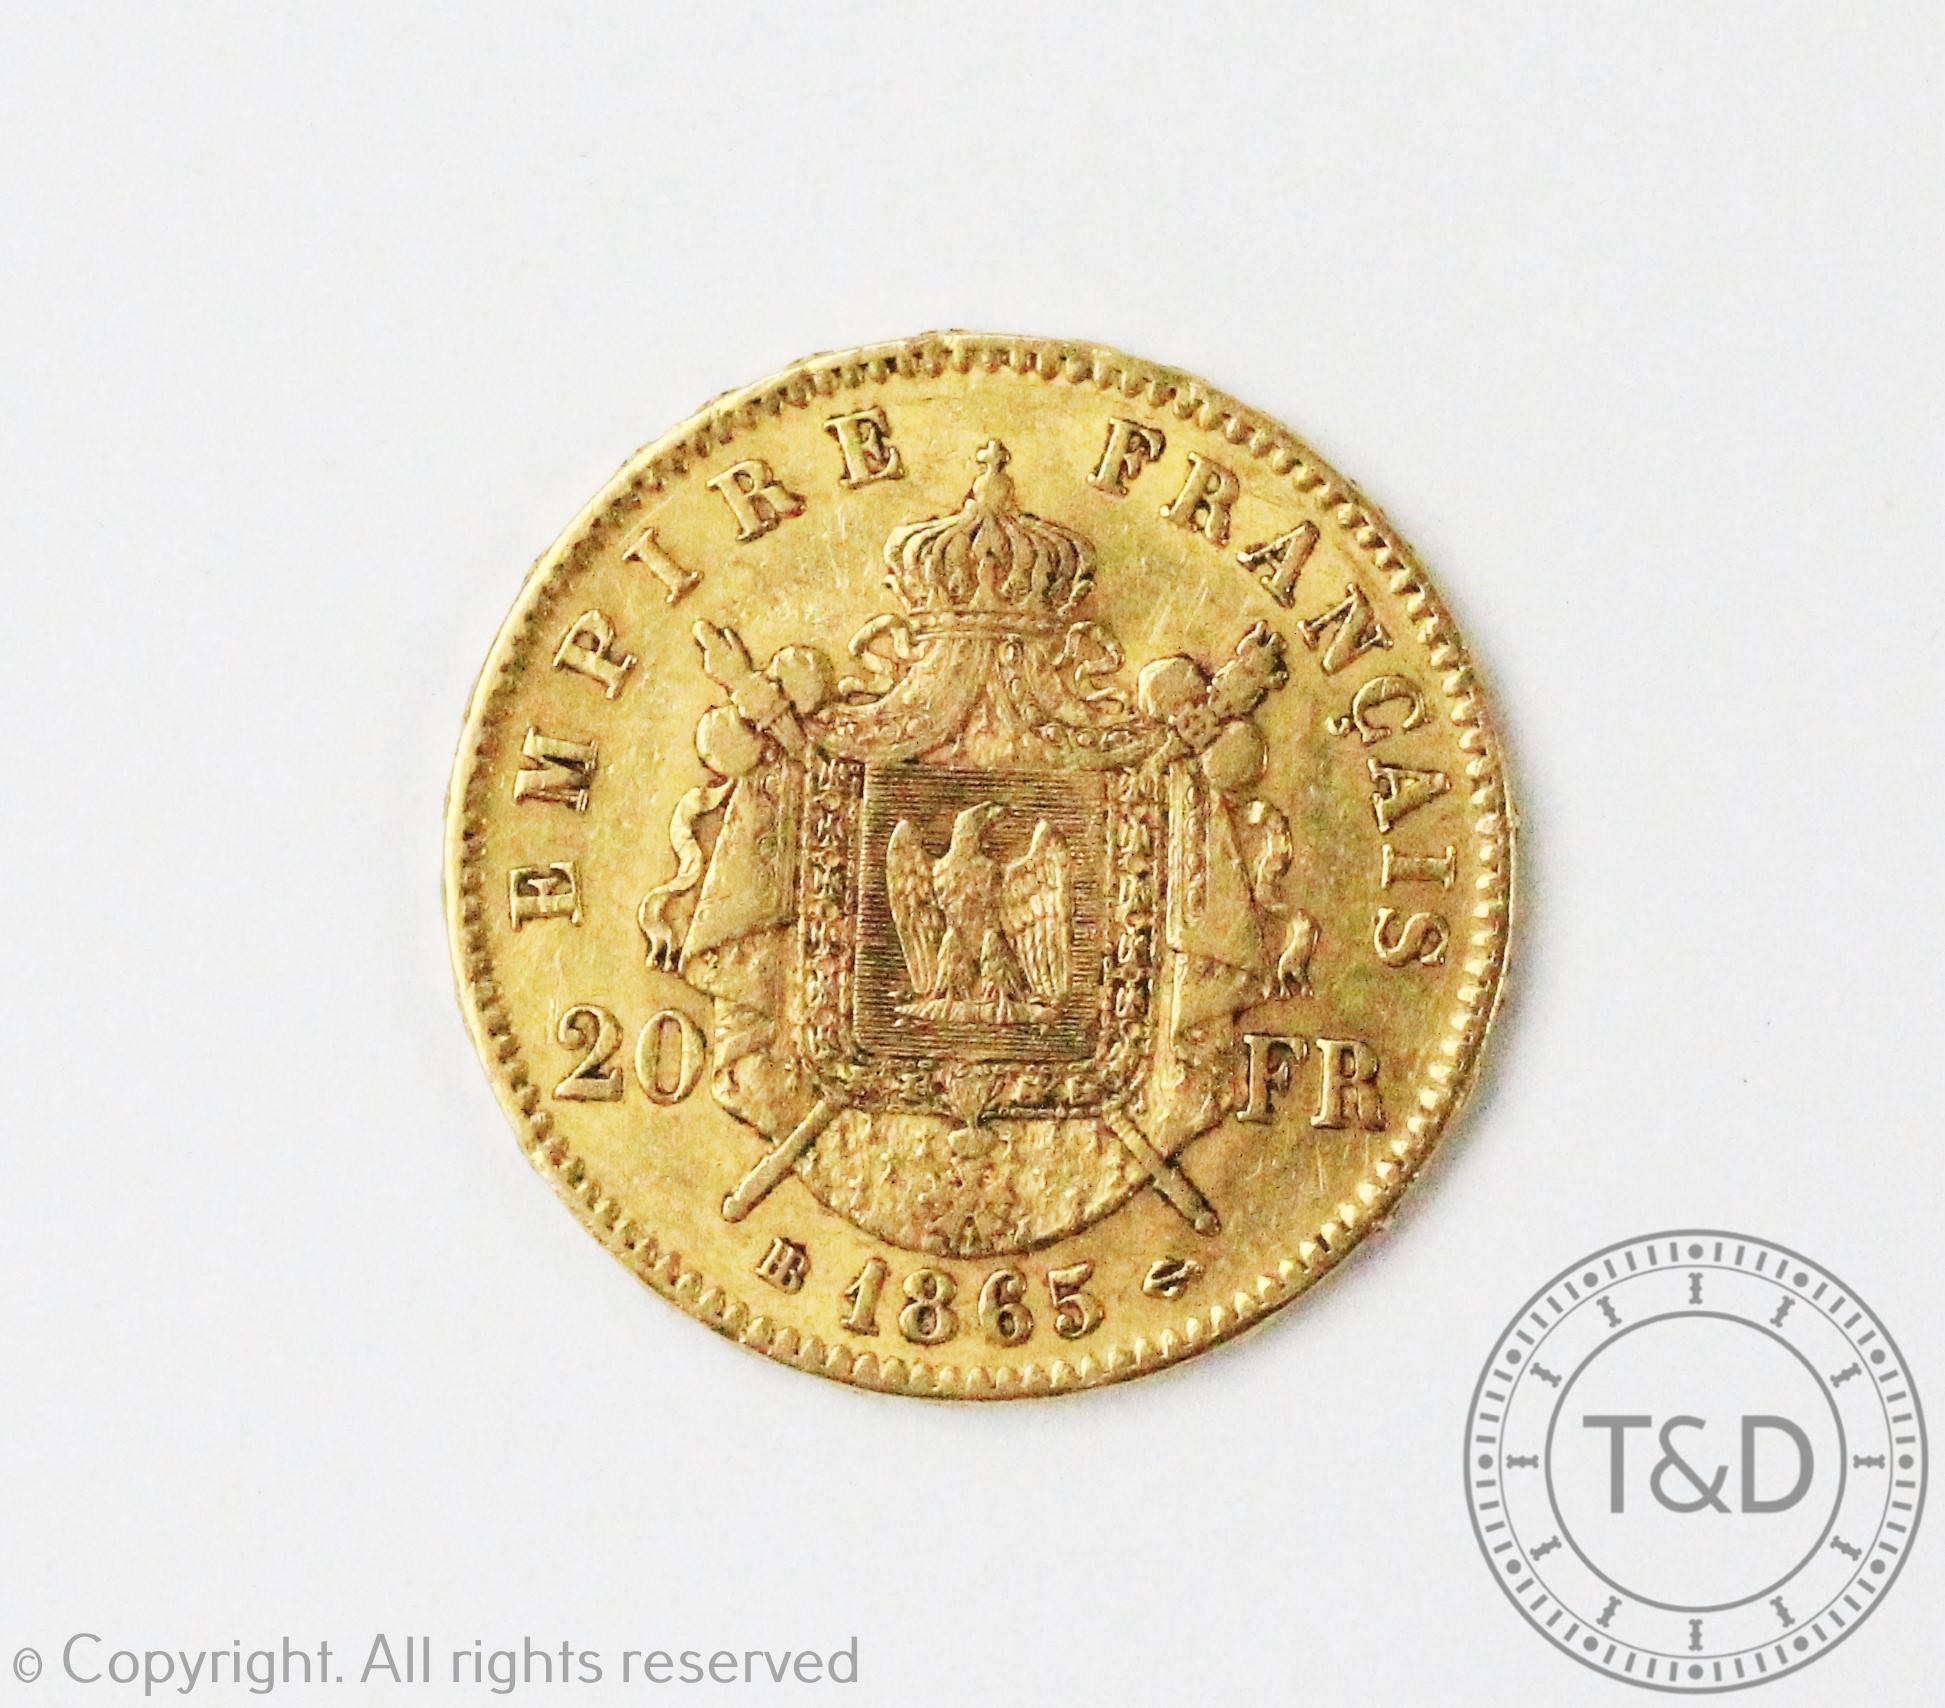 A 20 Franc gold coin dated 1865, weight 6.